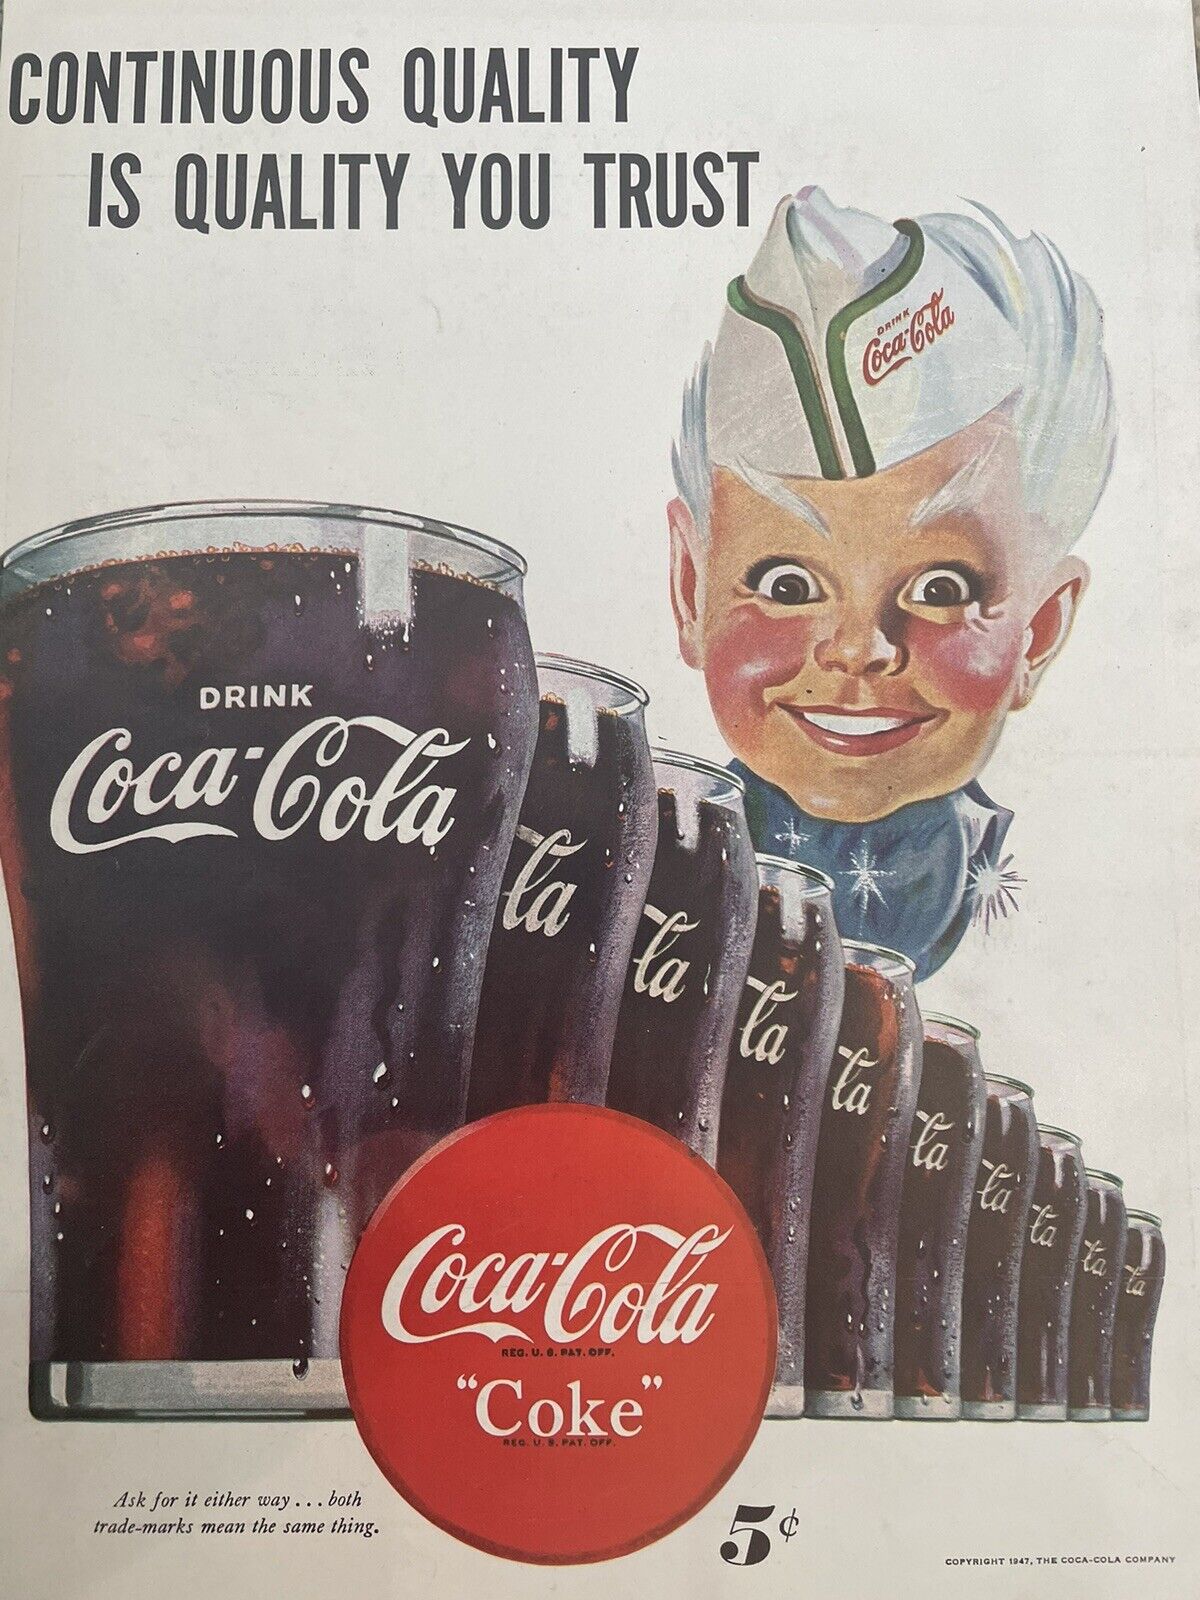 1947 vintage Coca-Cola print ad. Continuous quality is quality you trust